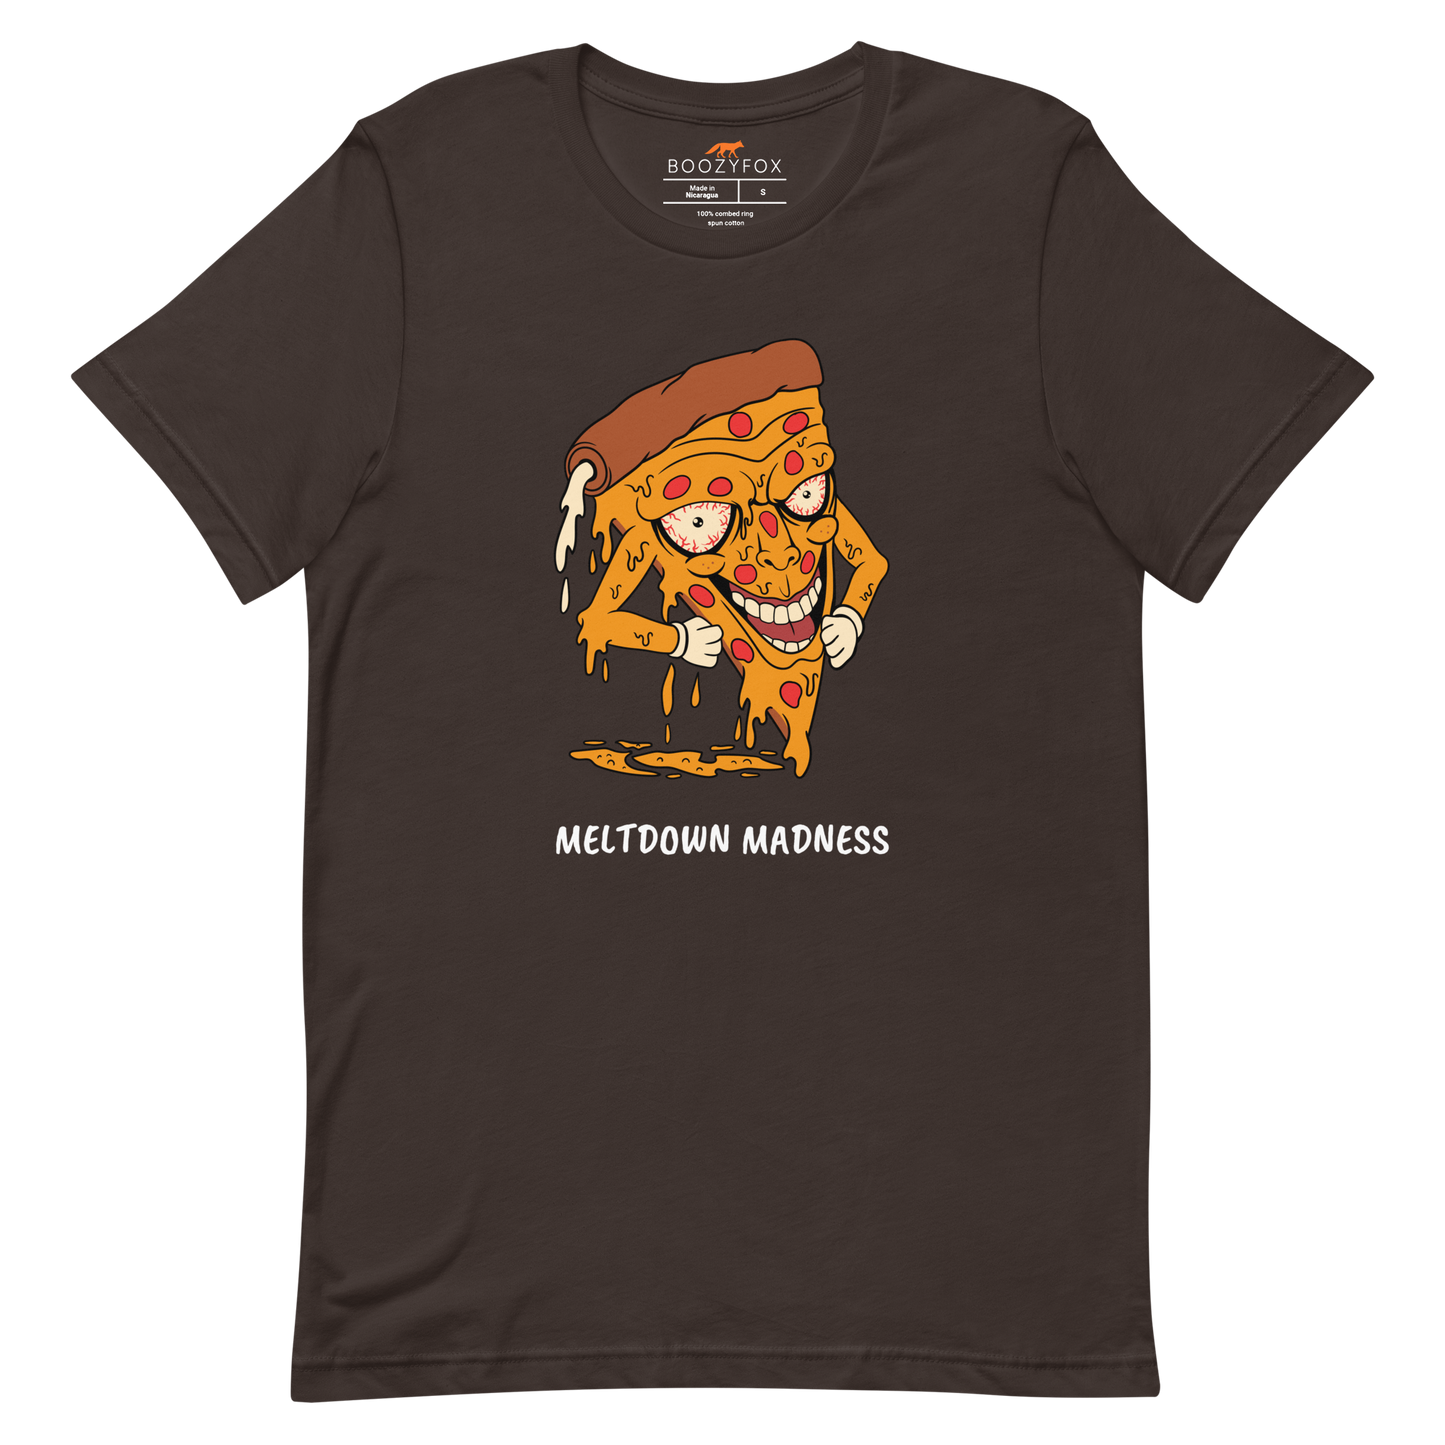 Brown Premium Melting Pizza Tee featuring a Meltdown Madness graphic on the chest - Funny Graphic Pizza Tees - Boozy Fox